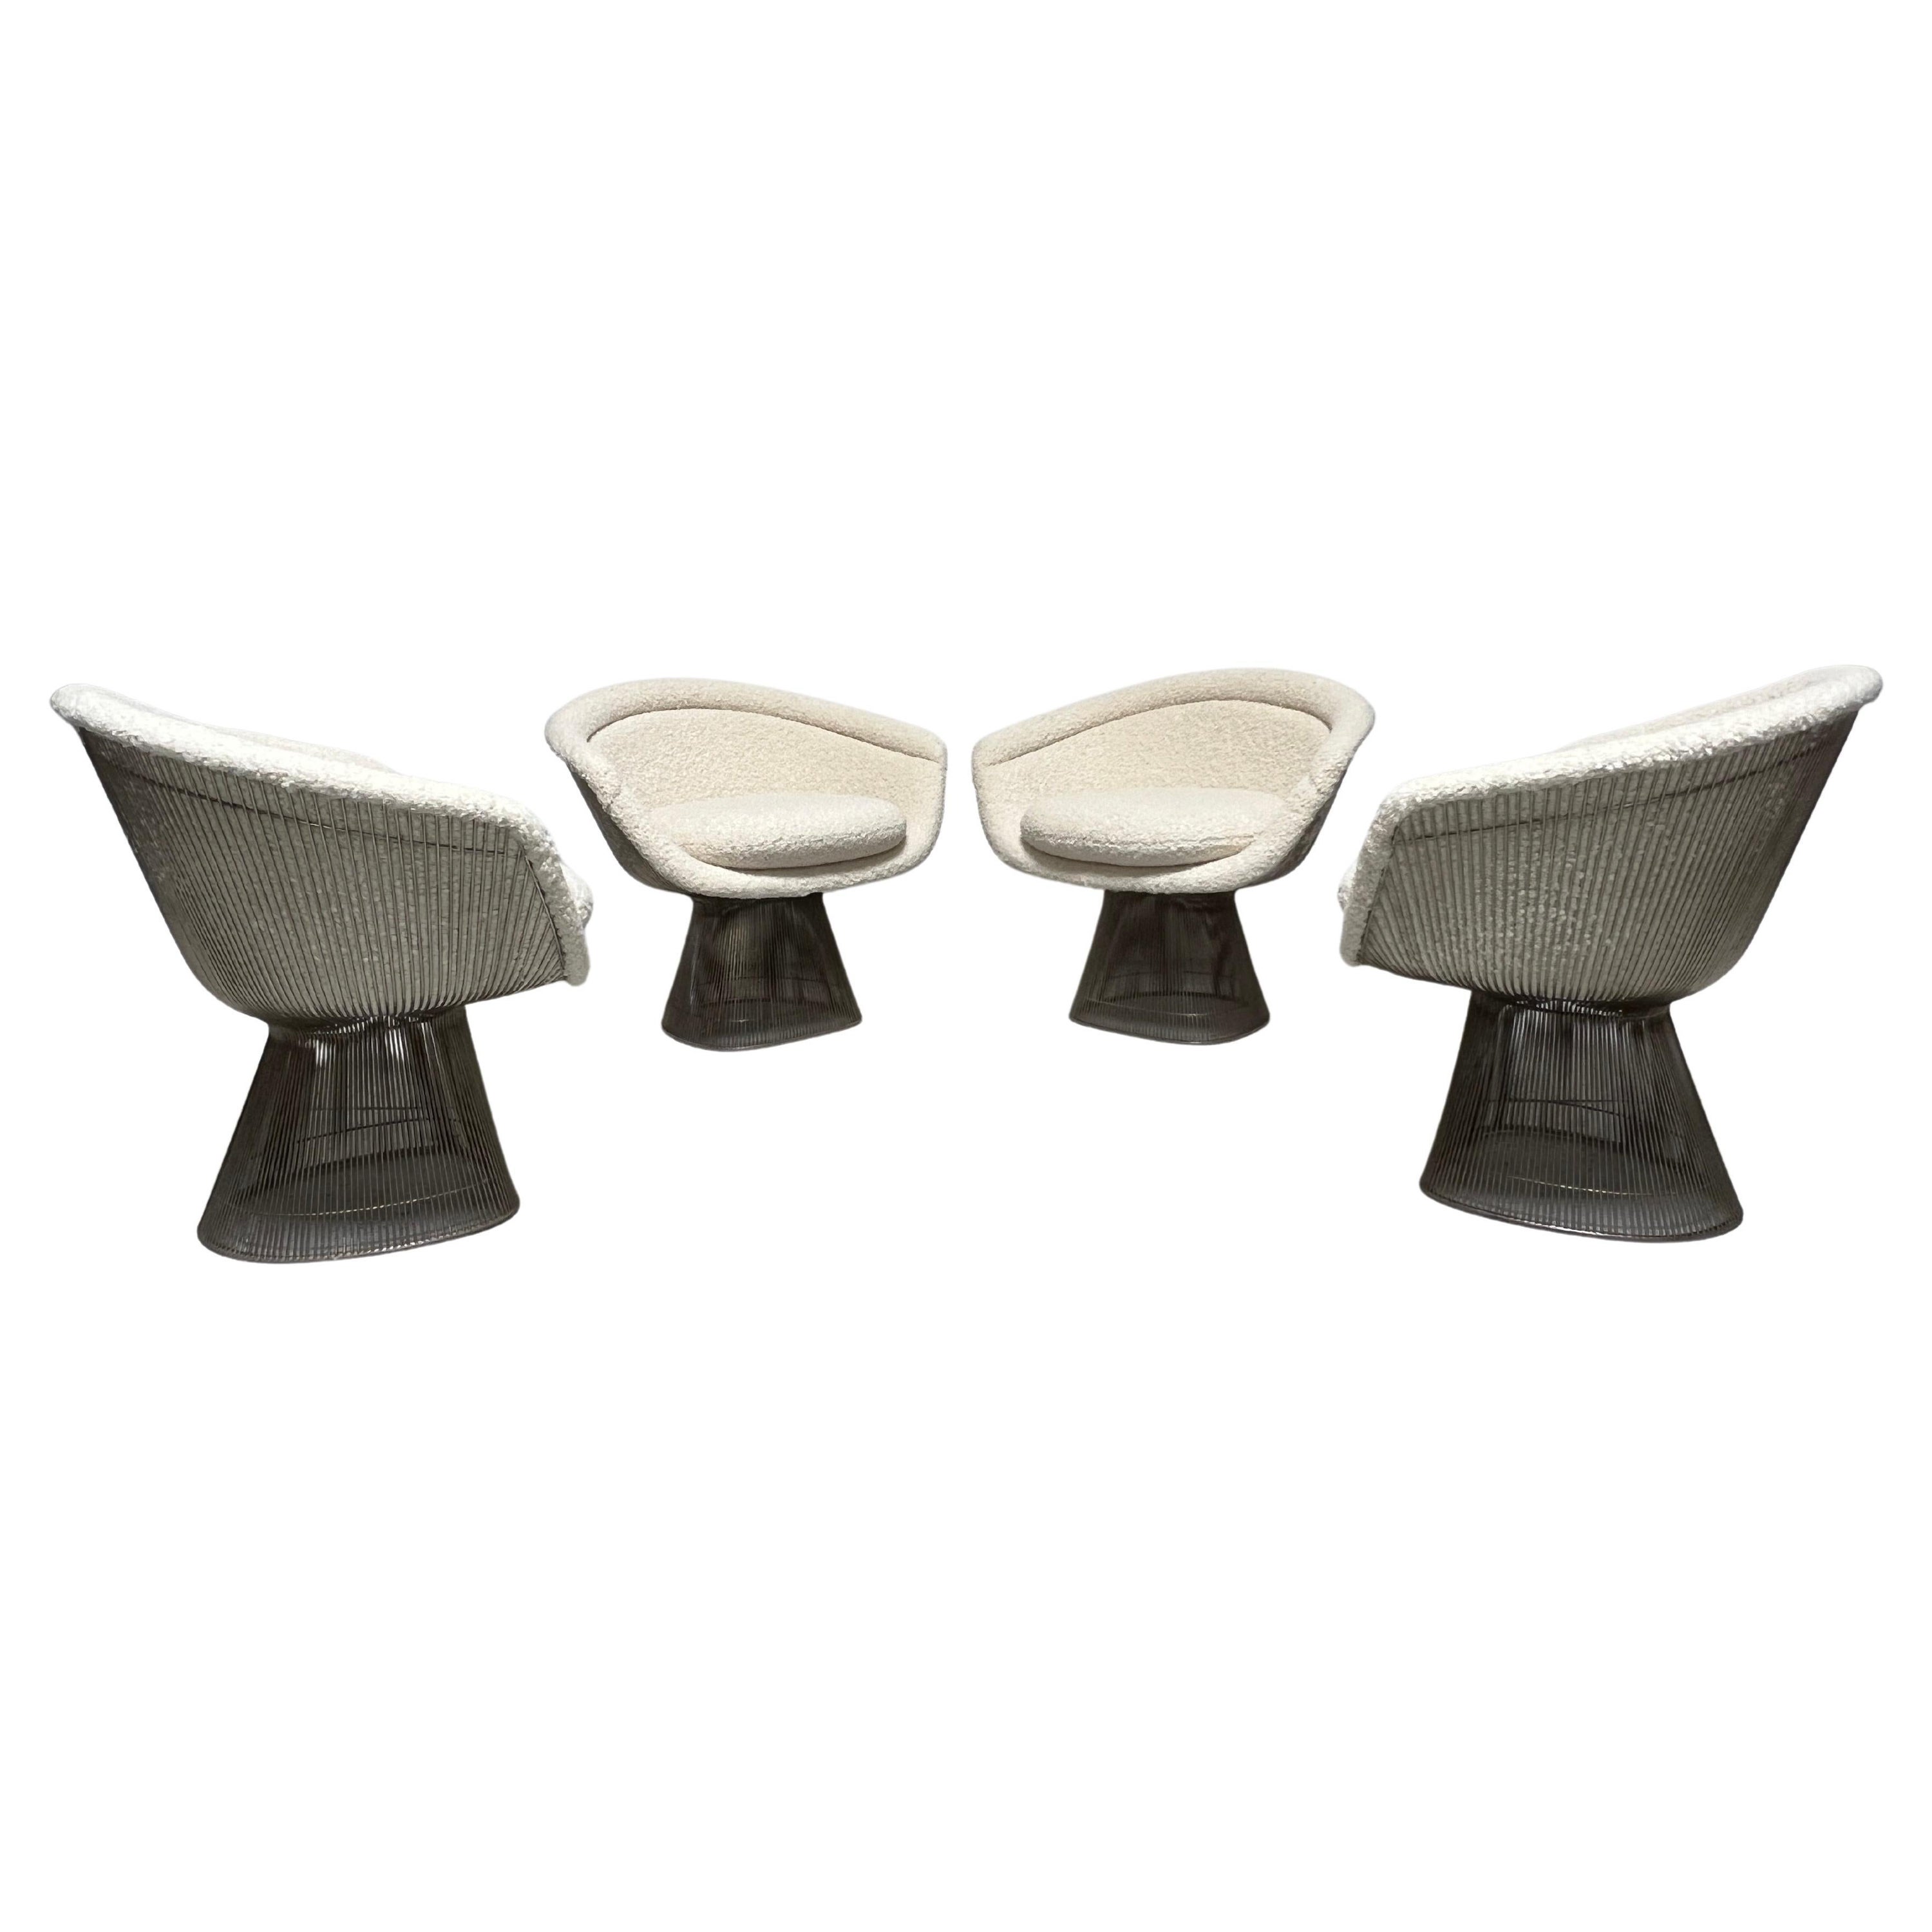 Set of Four Lounge Chairs by Warren Platner for Knoll